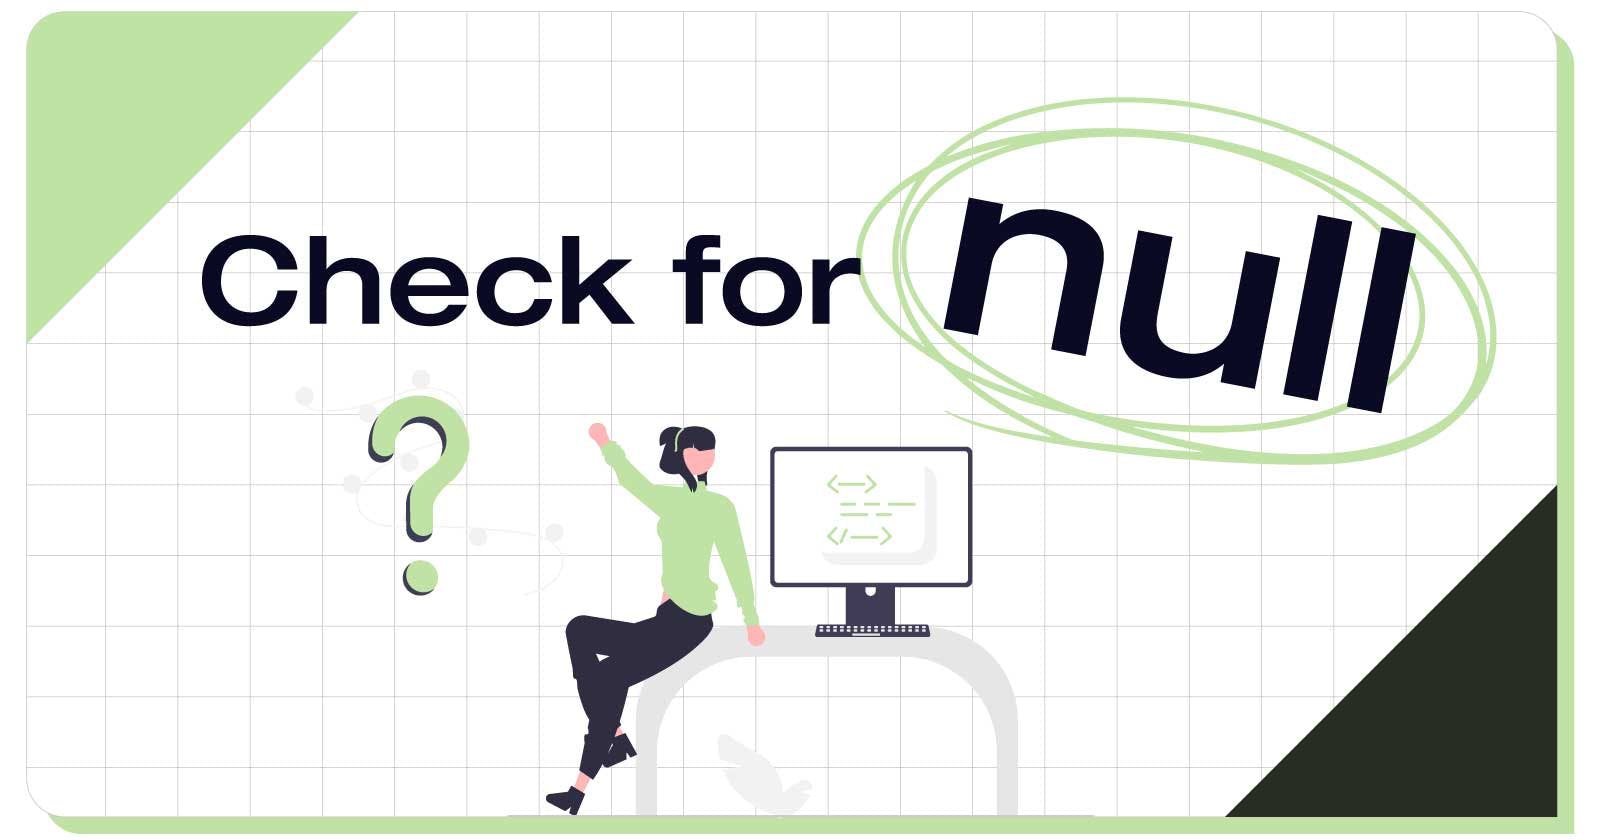 How to Check for Null in Javascript